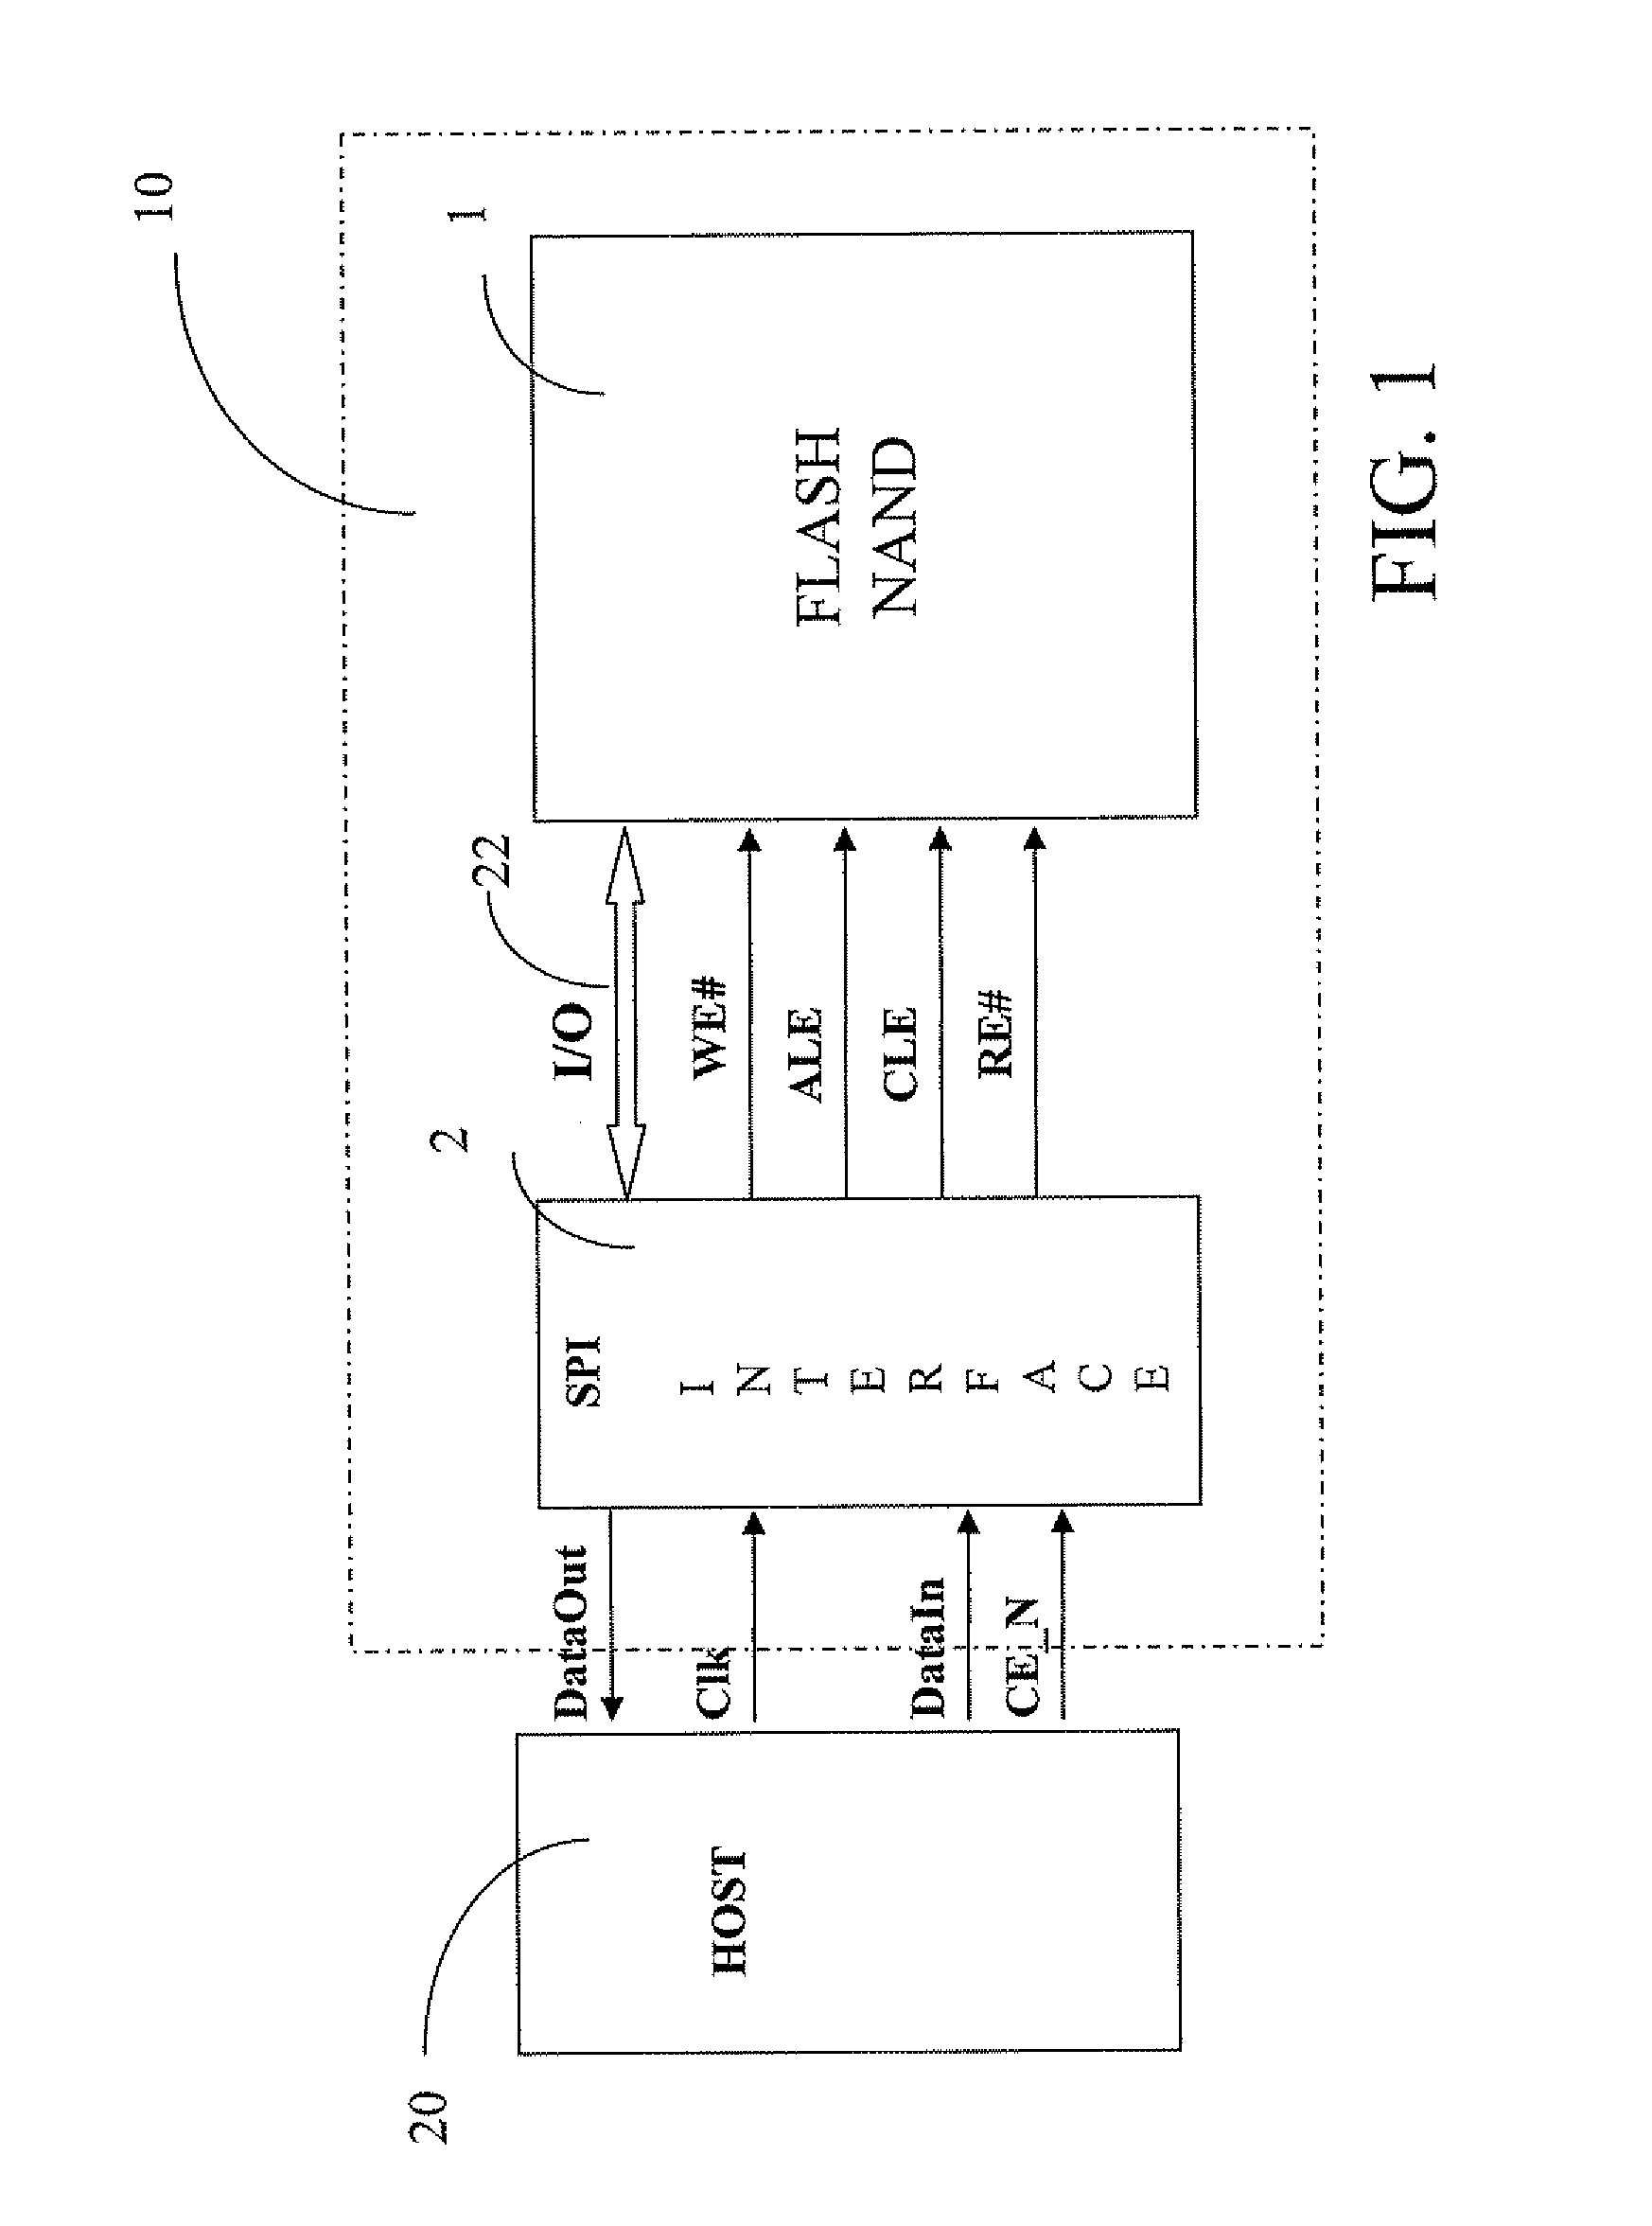 Memory architecture with serial peripheral interface